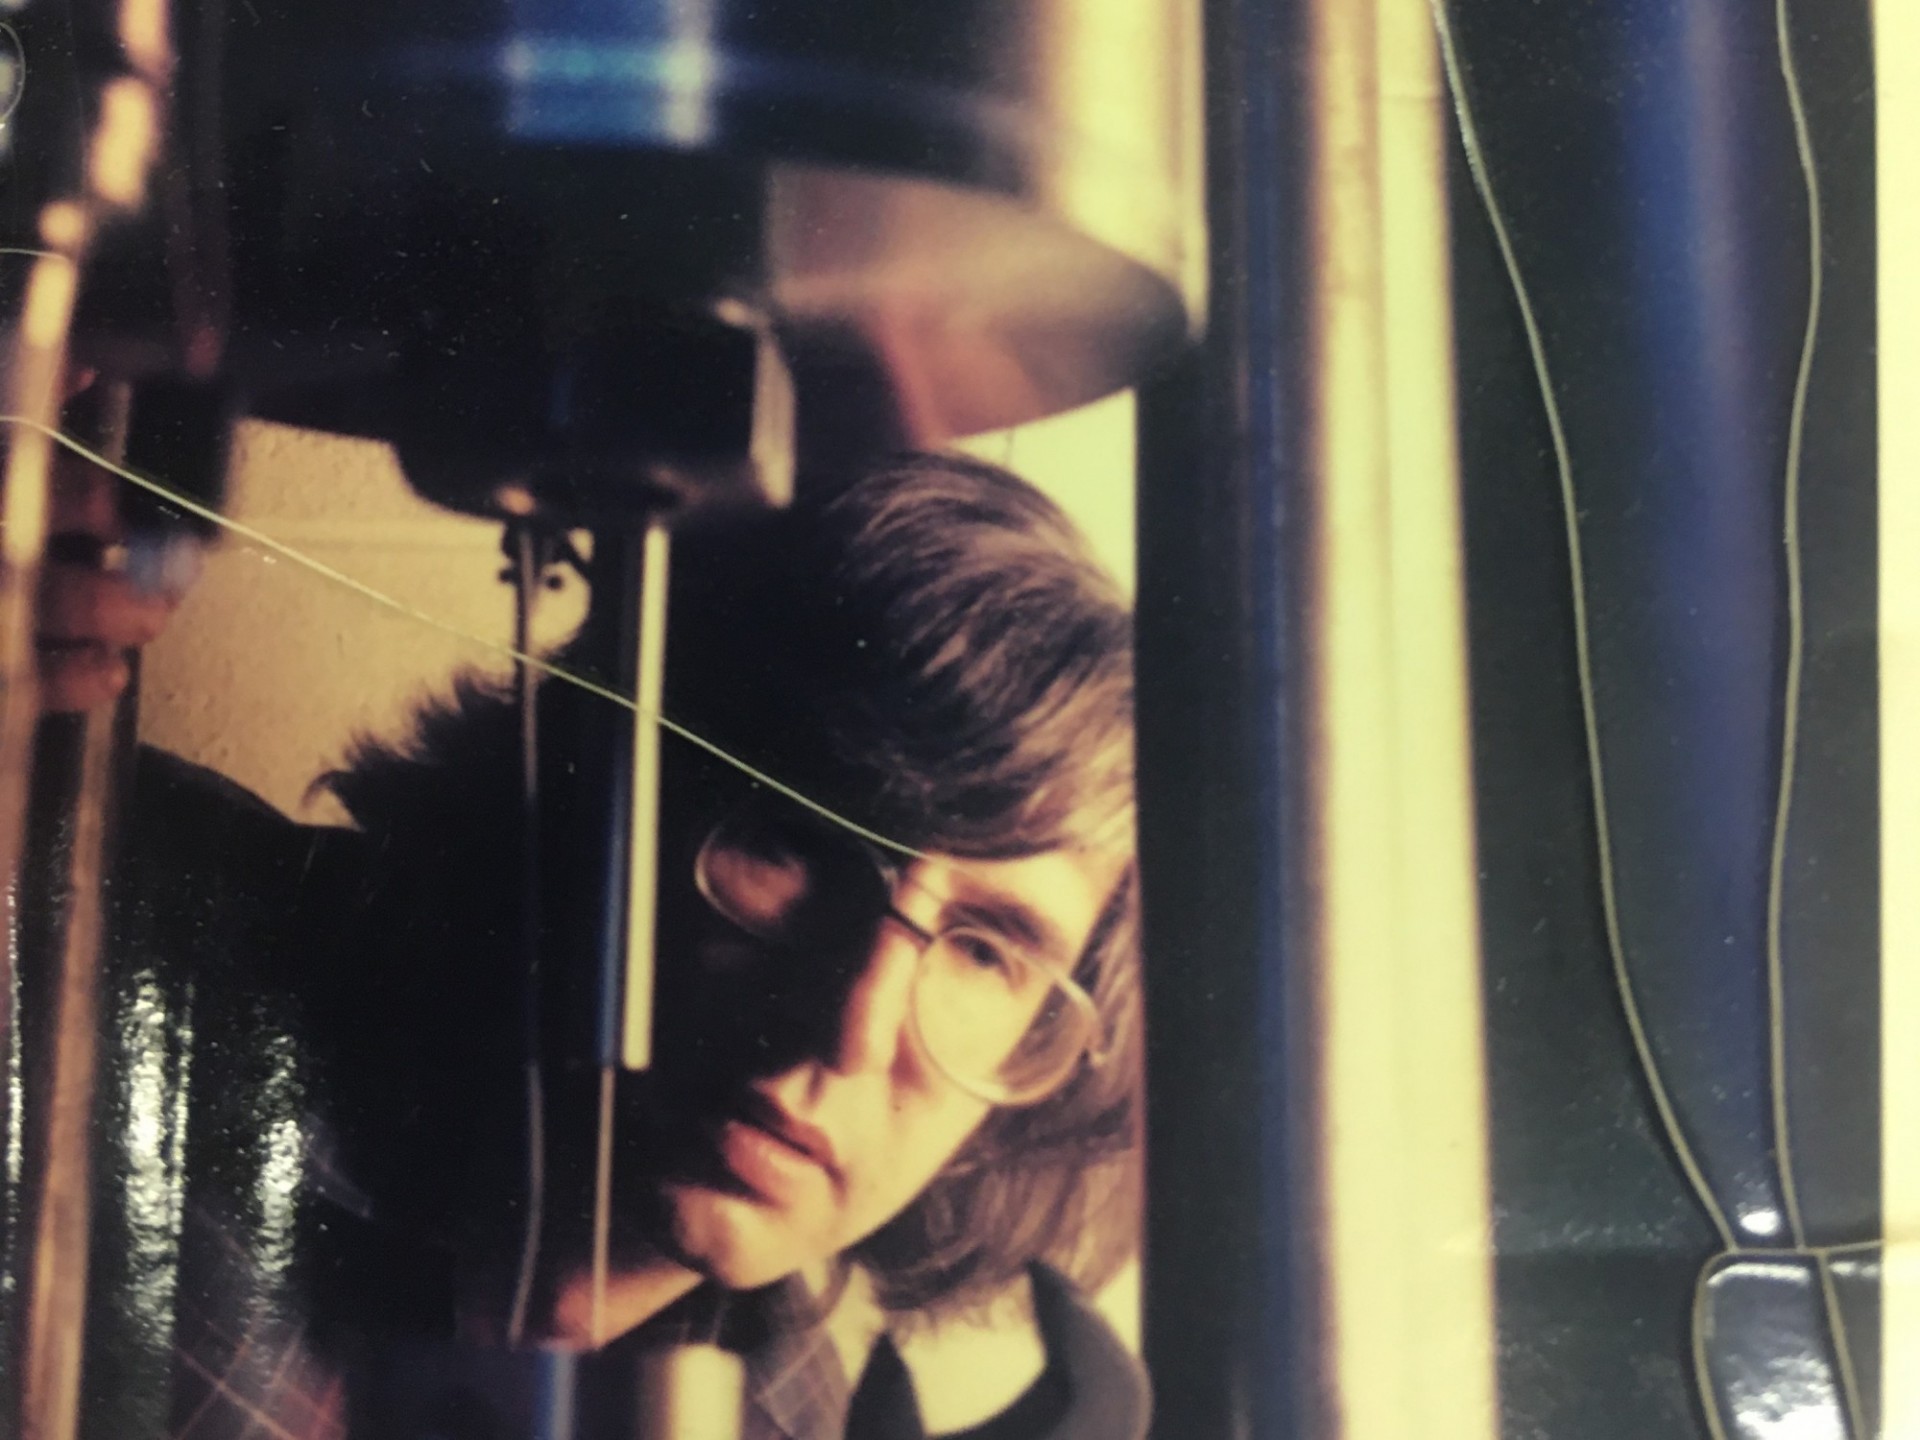 Chris Scholz peeping underneath the pressure cell on the triax for a magazine photo shoot (~1970s)